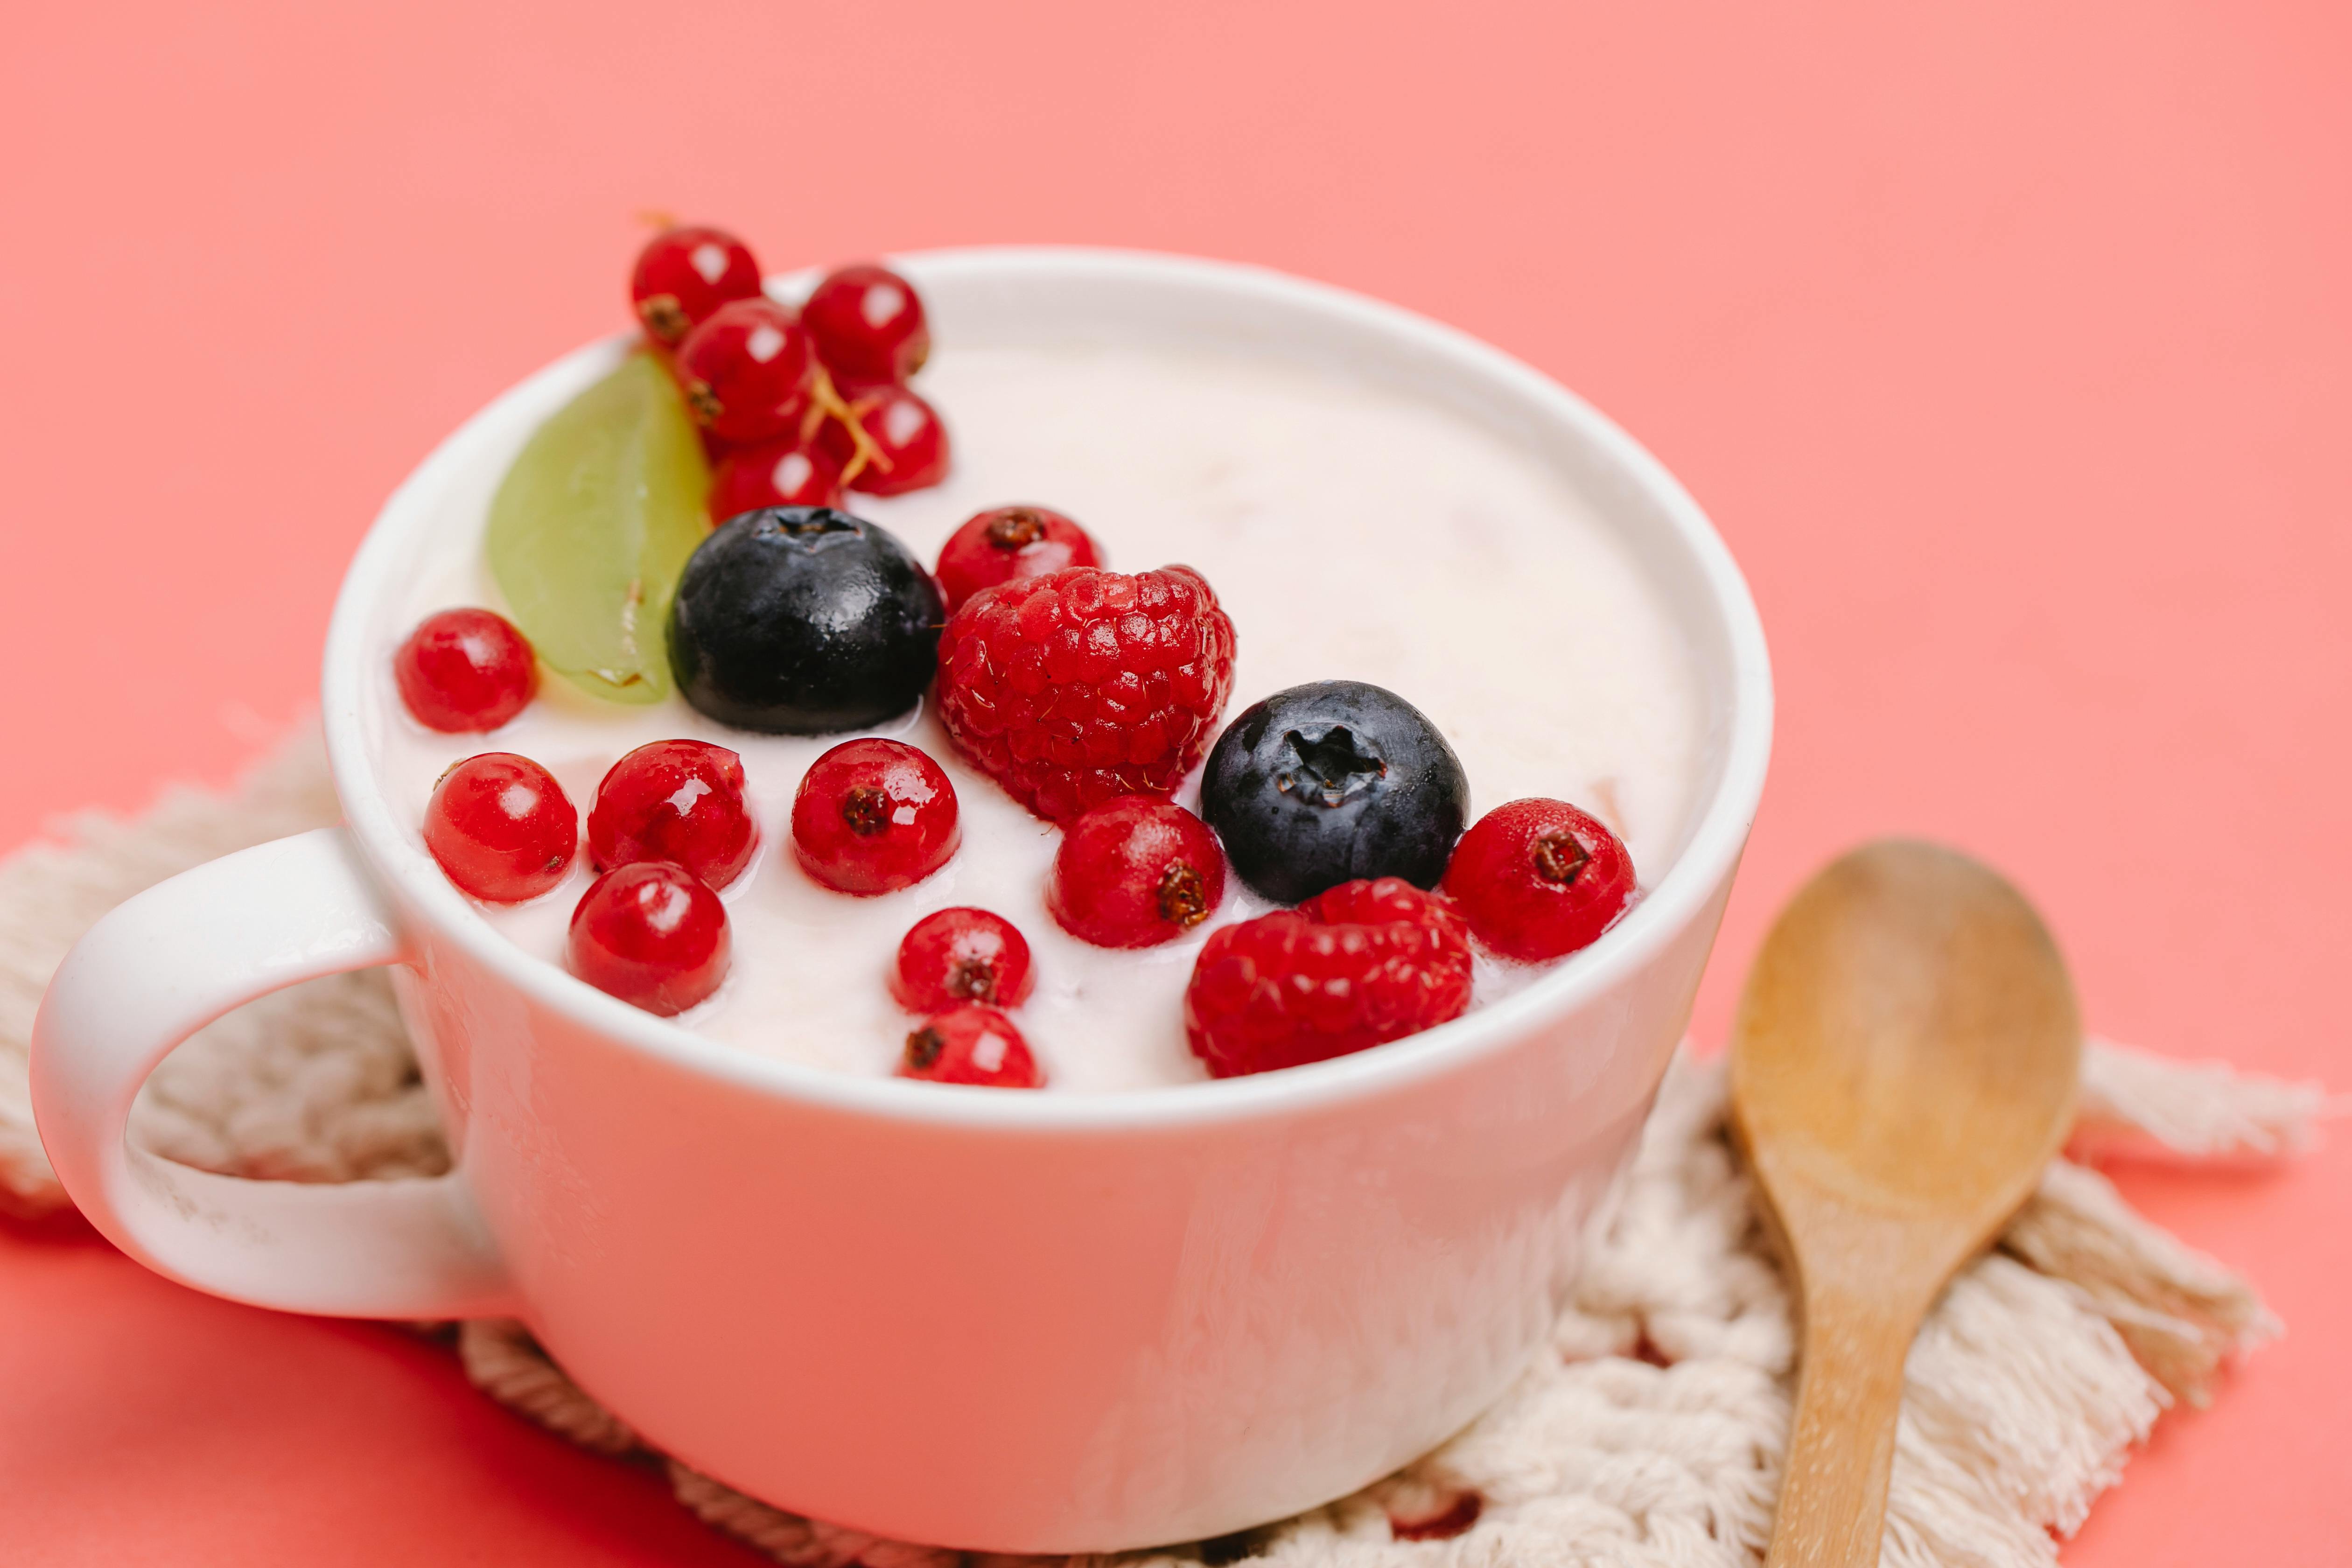 Cup filled with yoghurt and berries